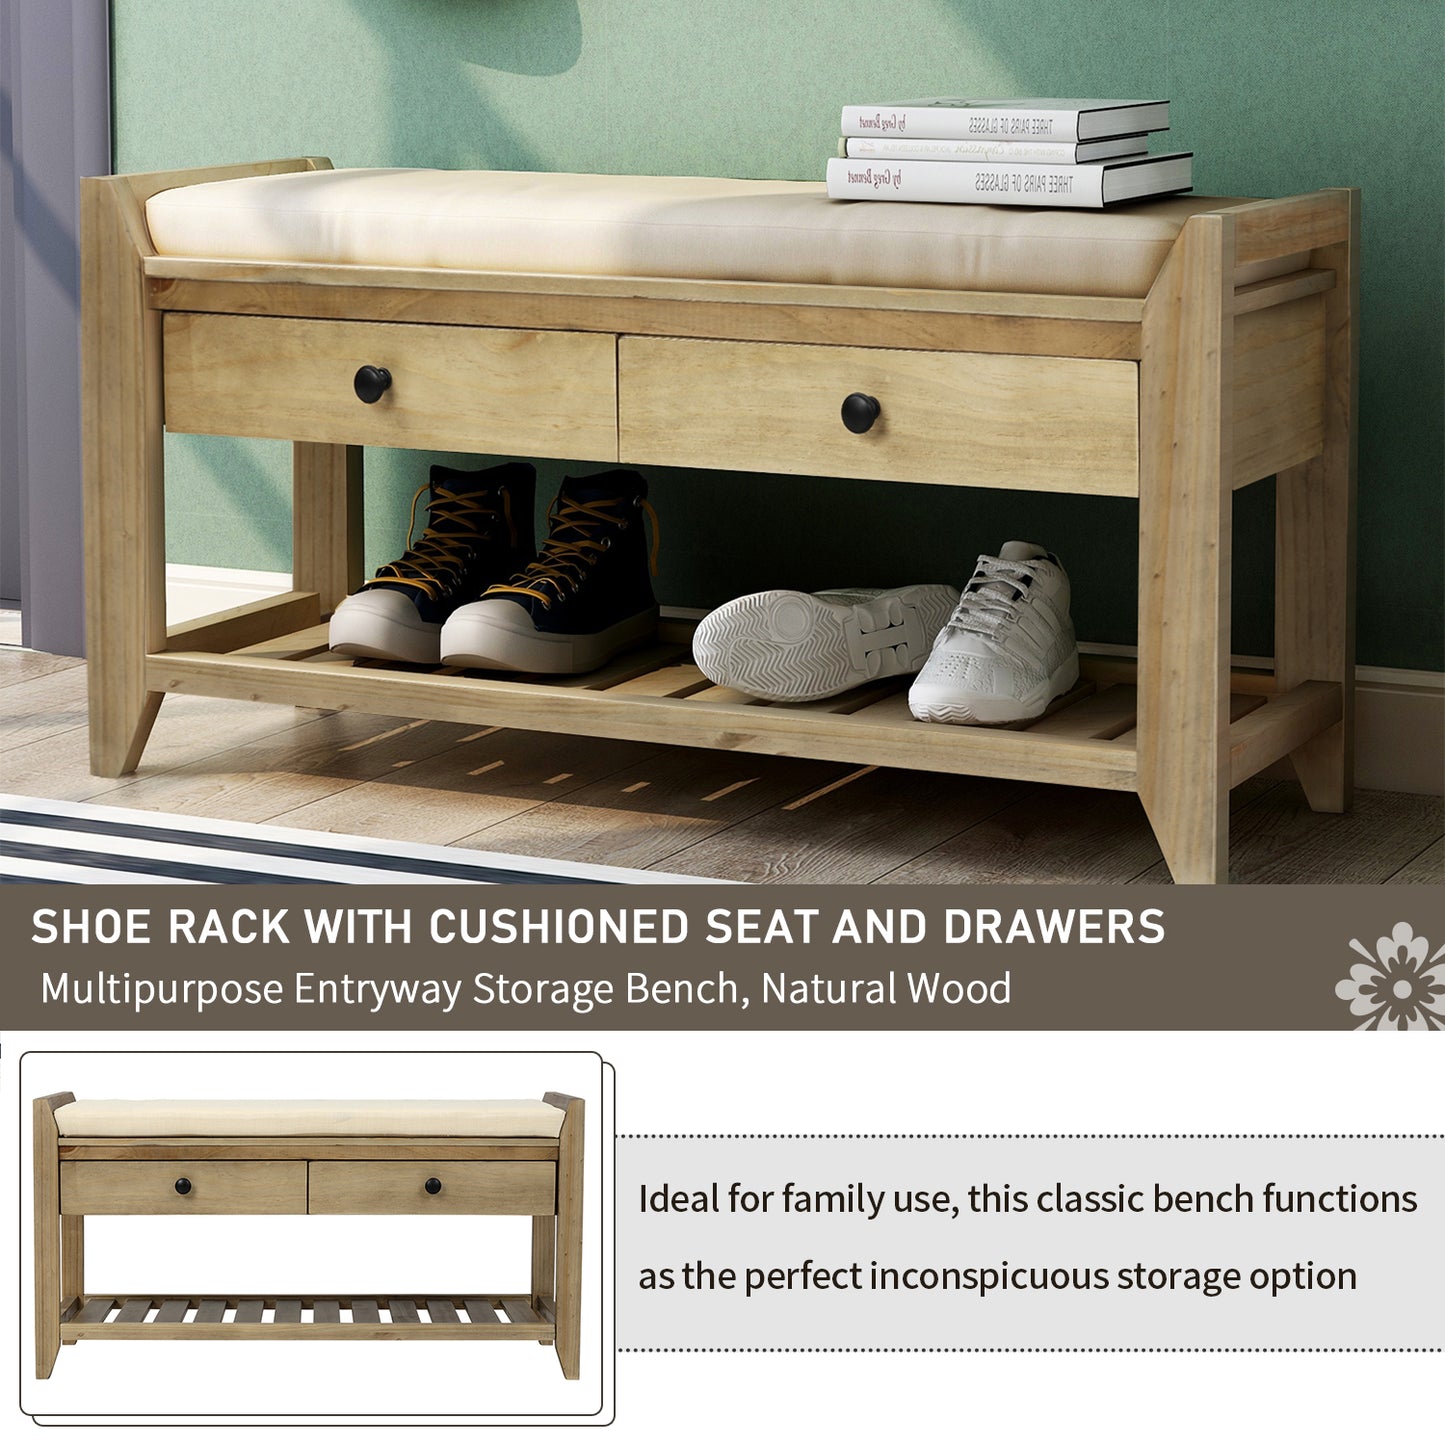 Shoe Rack with Cushioned Seat and Drawers, Multipurpose Entryway Storage Bench, Gray Wash